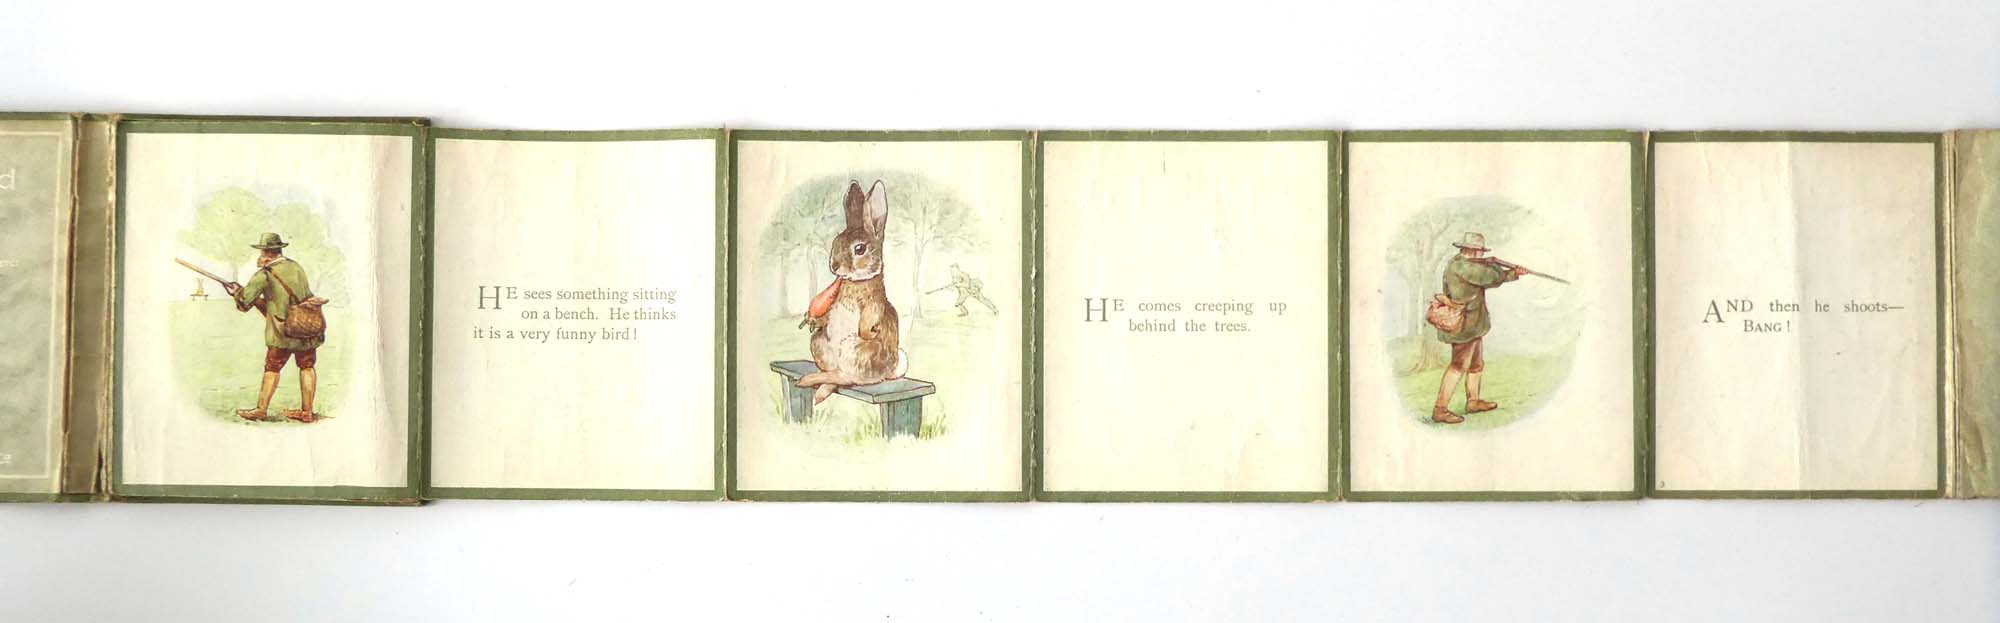 Beatrix Potter : The Story of A Fierce Bad Rabbit, 1906. 12mo Hb. Wallet style format. - Image 5 of 6